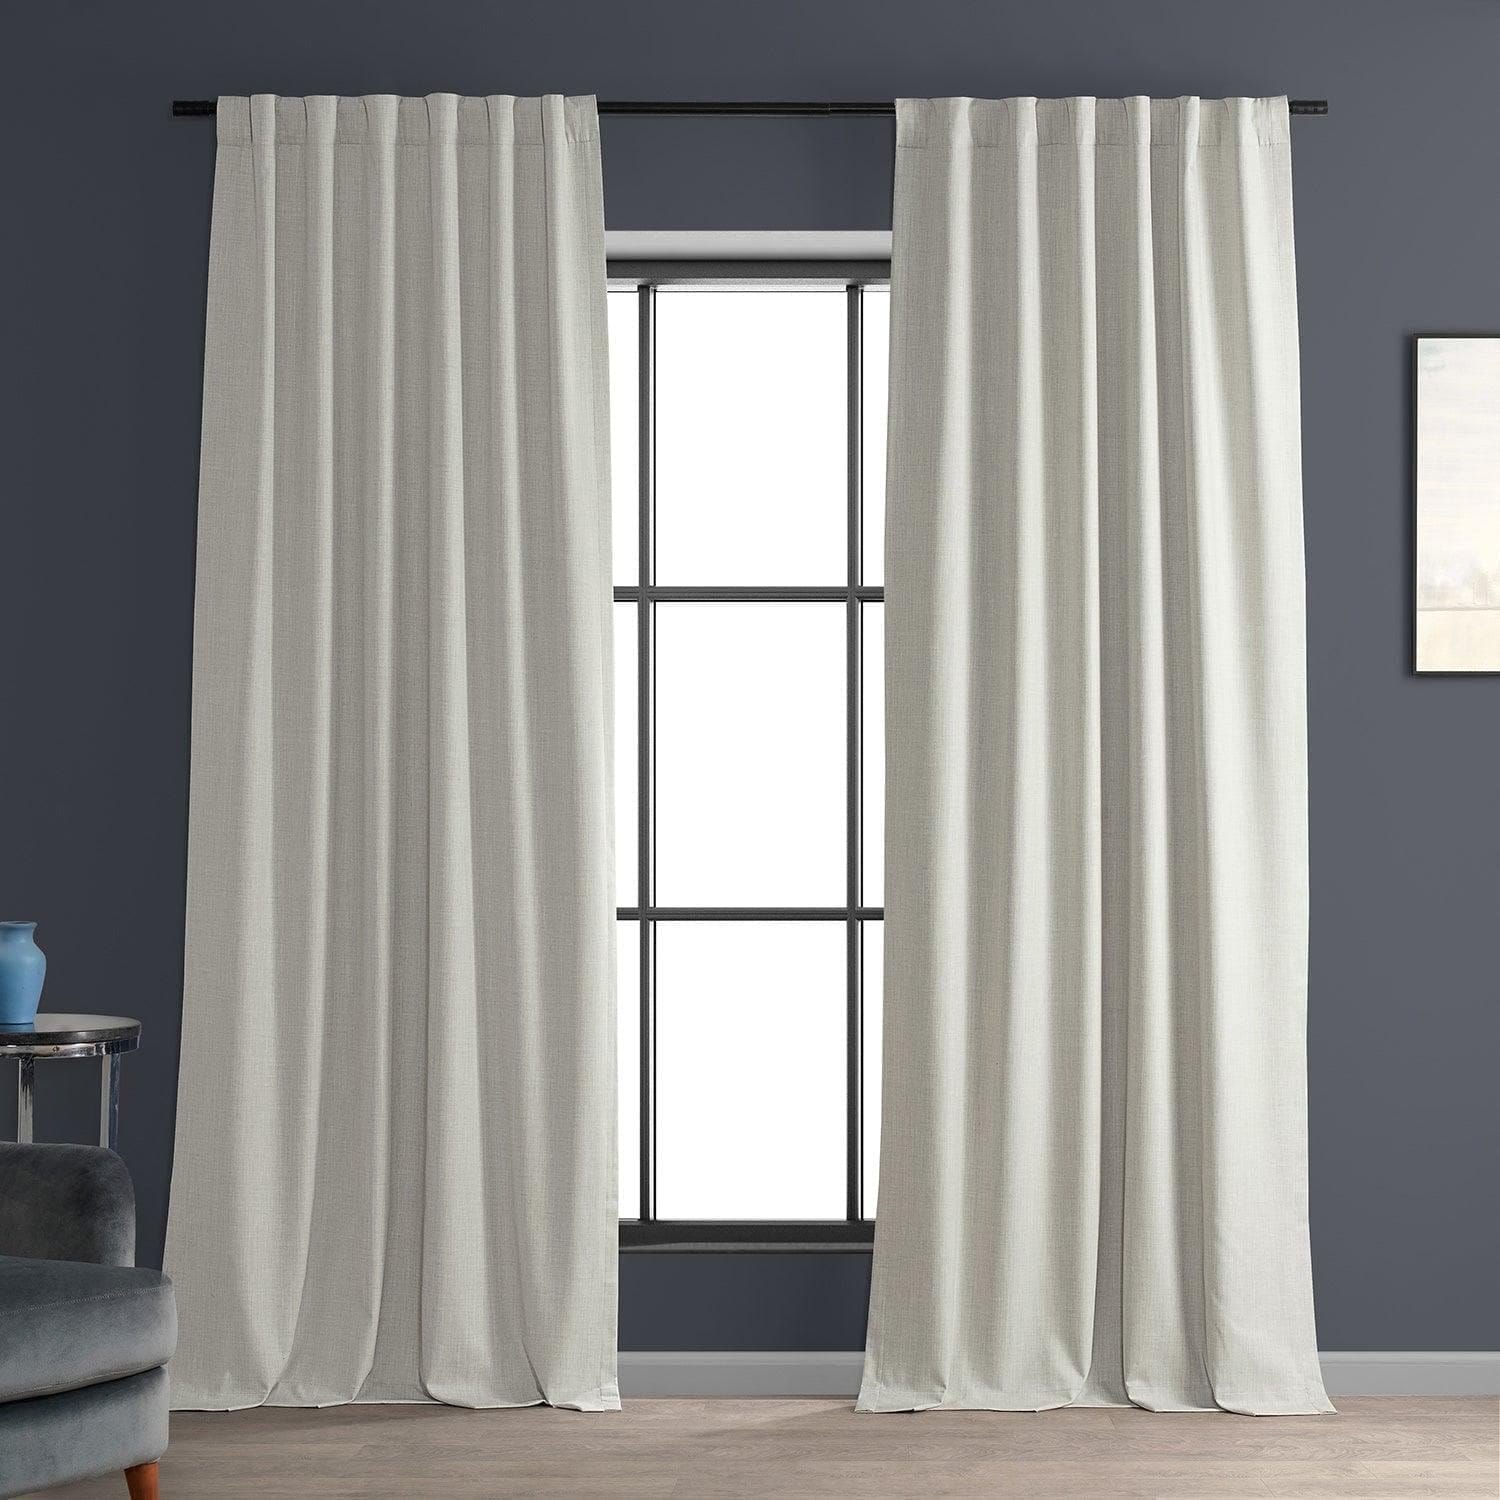 Image of Warm White Performance Linen Hotel Blackout Curtain